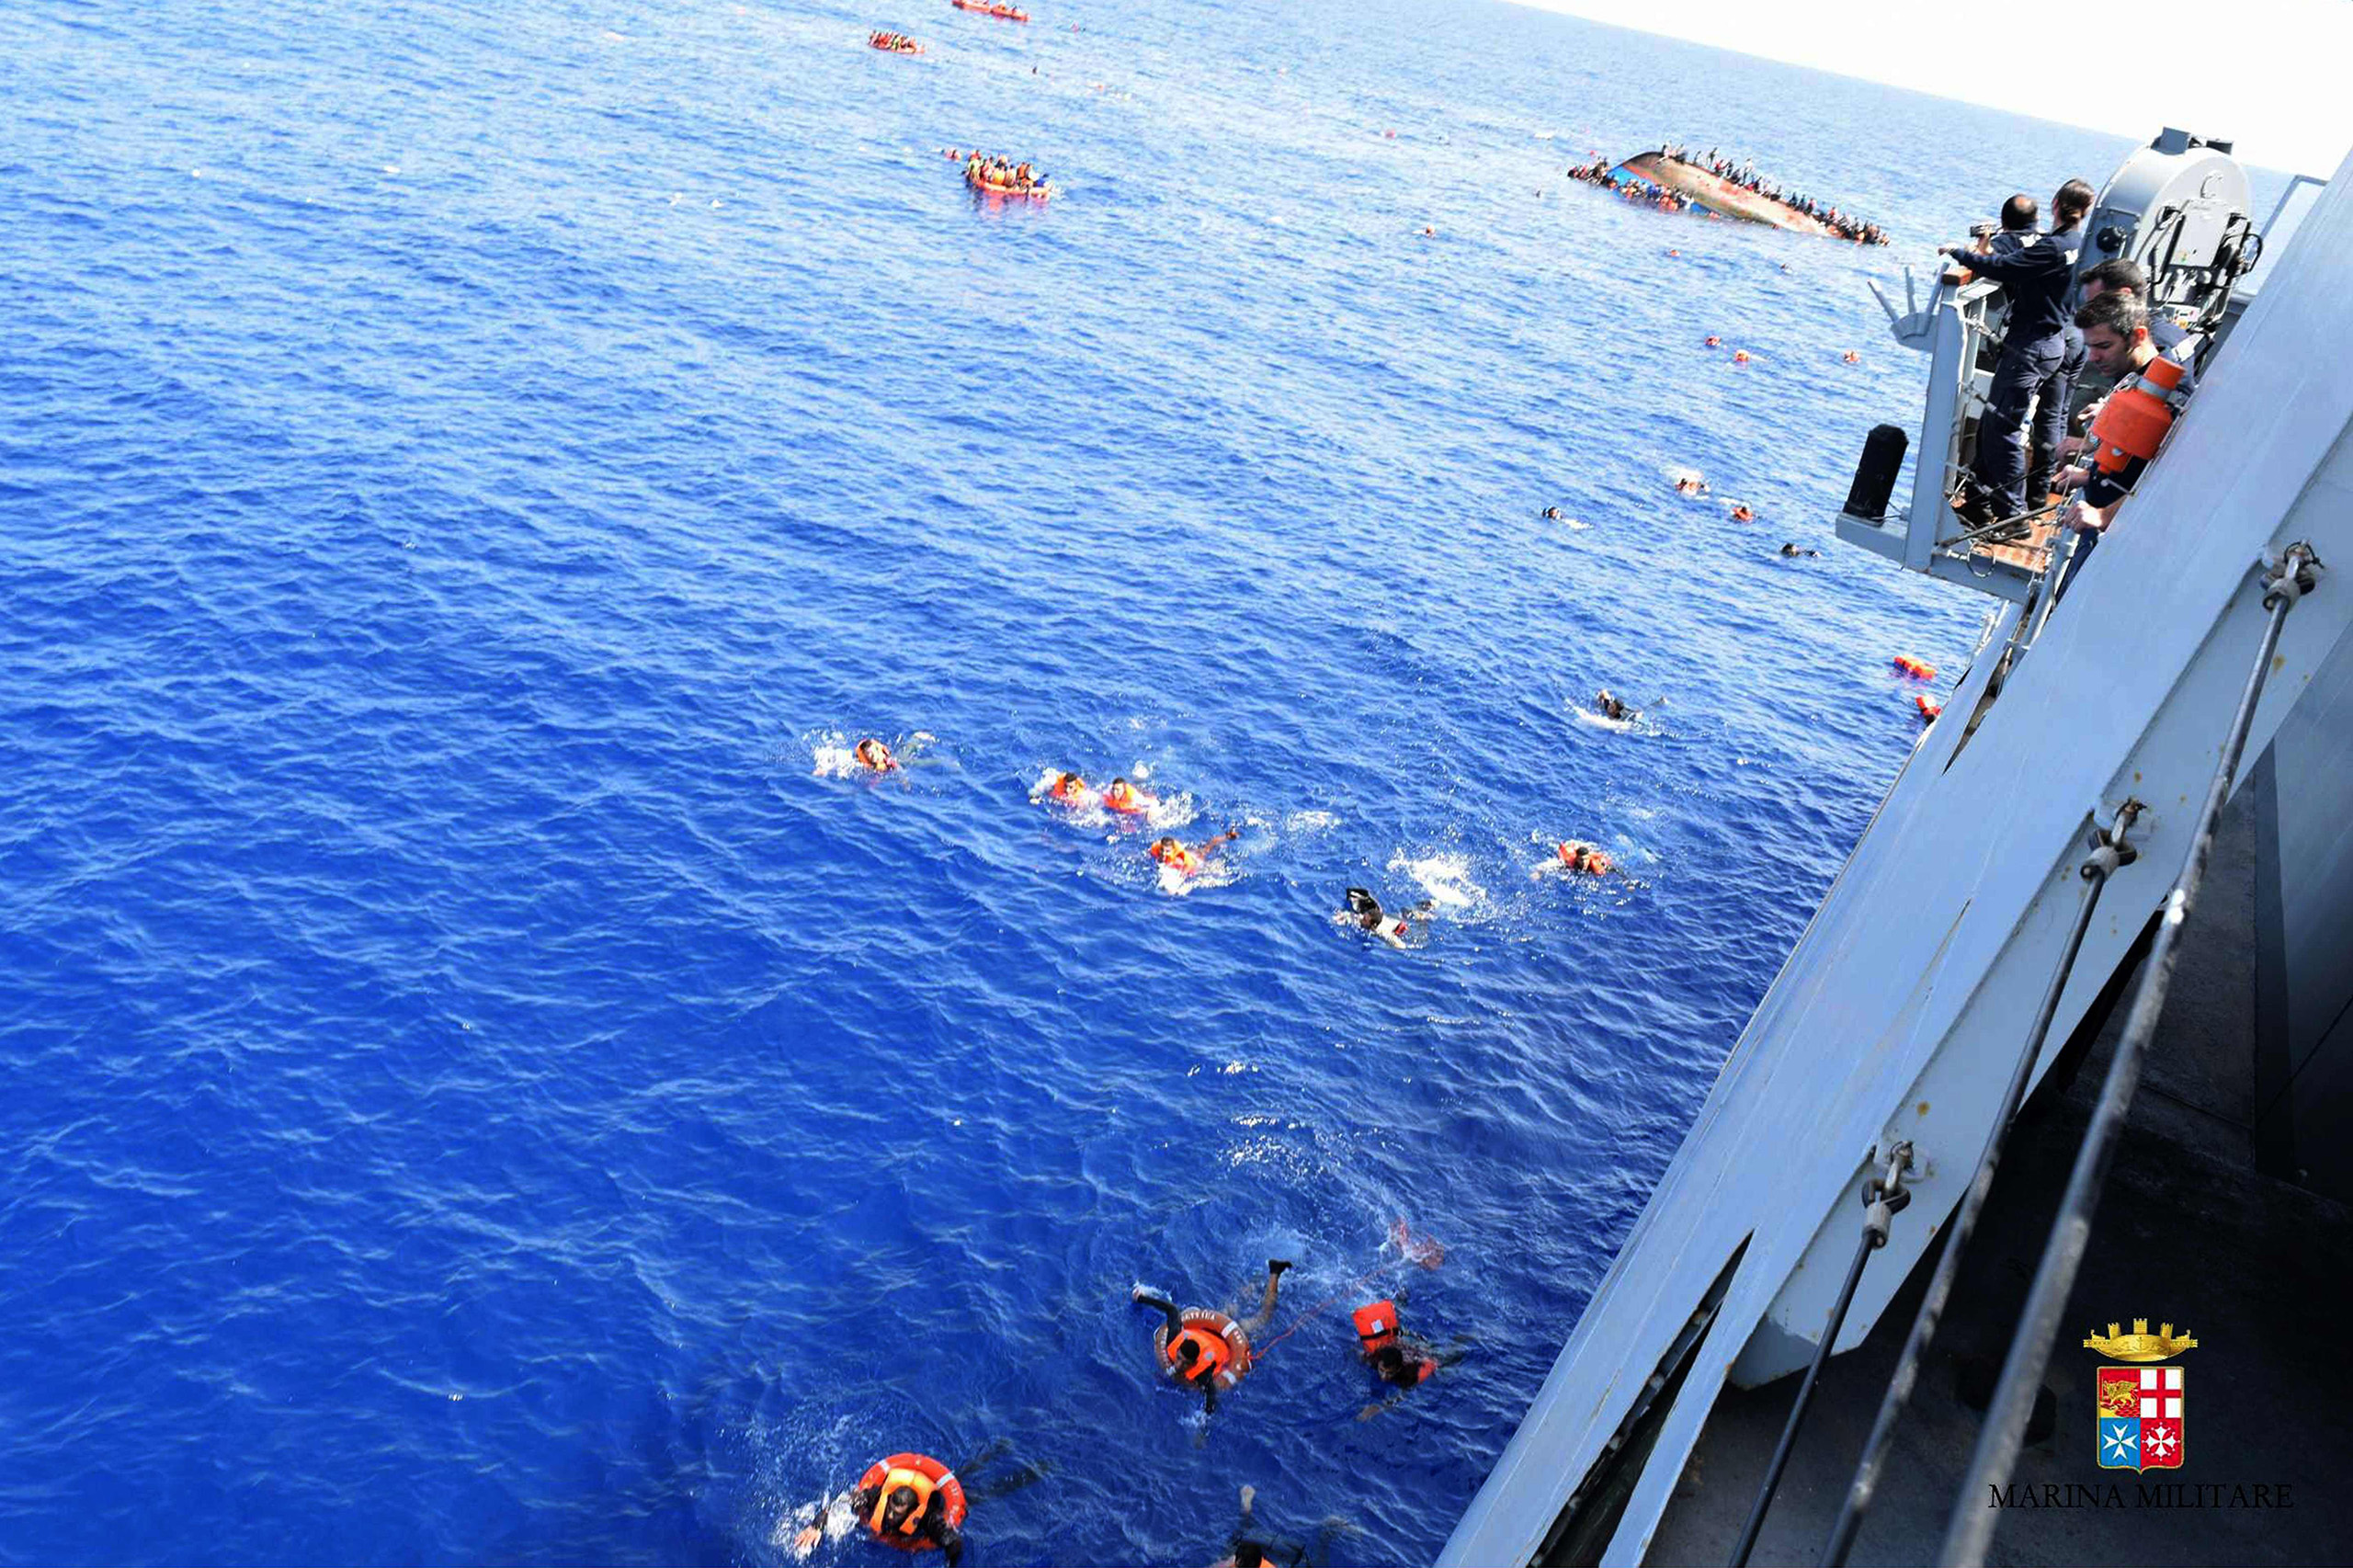 Migrants swimming towards the Italian navy’s Bettica patrol boat, that spotted the overcrowded boat in precarious conditions off the coast of Libya. (Italian Navy/AFP/Getty Images)